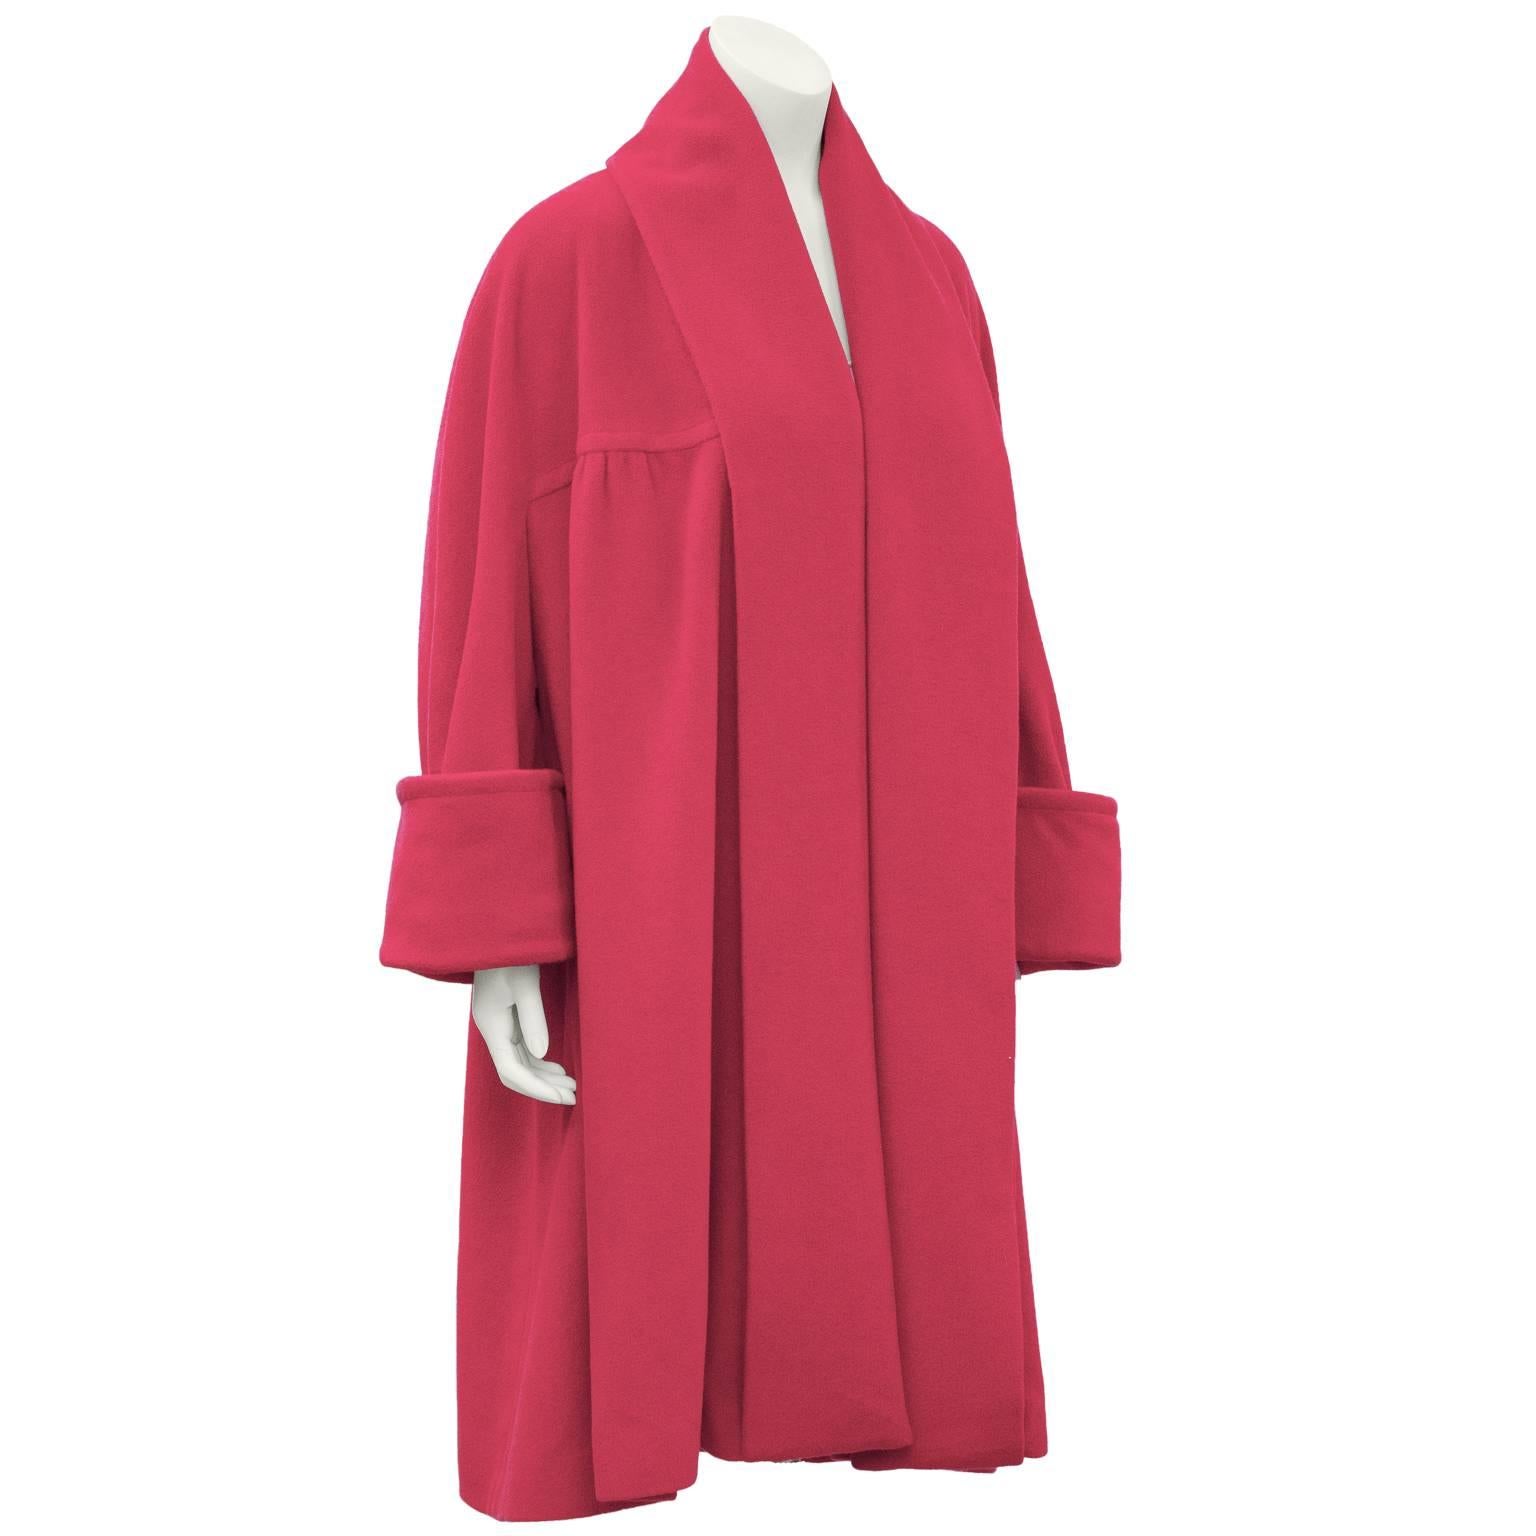 Chanel hot pink cashmere oversized robe style swing coat from Fall 1991. The coat has wide shawl style lapels, side slit pockets, and wide banded cuffs. It features gathering yoke seam that travels across the bustline and back. Finished with 3 gold